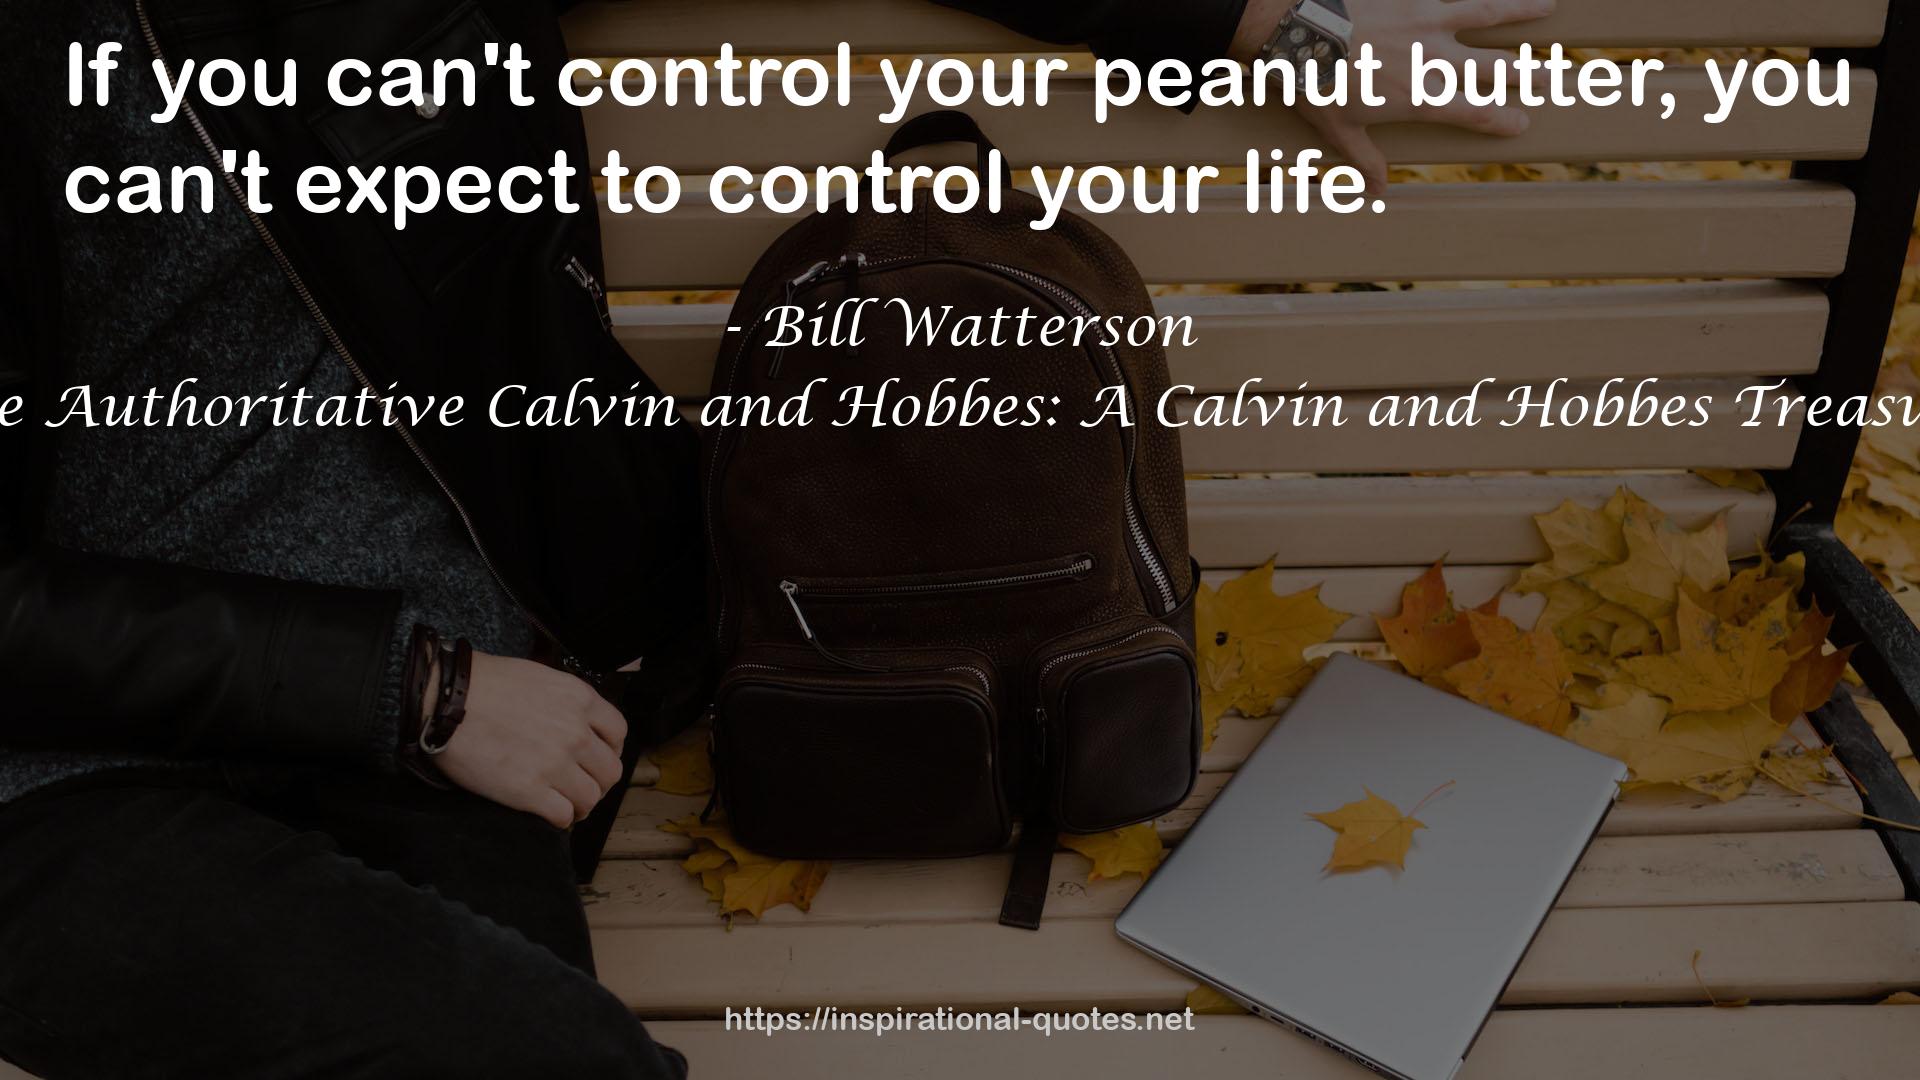 The Authoritative Calvin and Hobbes: A Calvin and Hobbes Treasury QUOTES